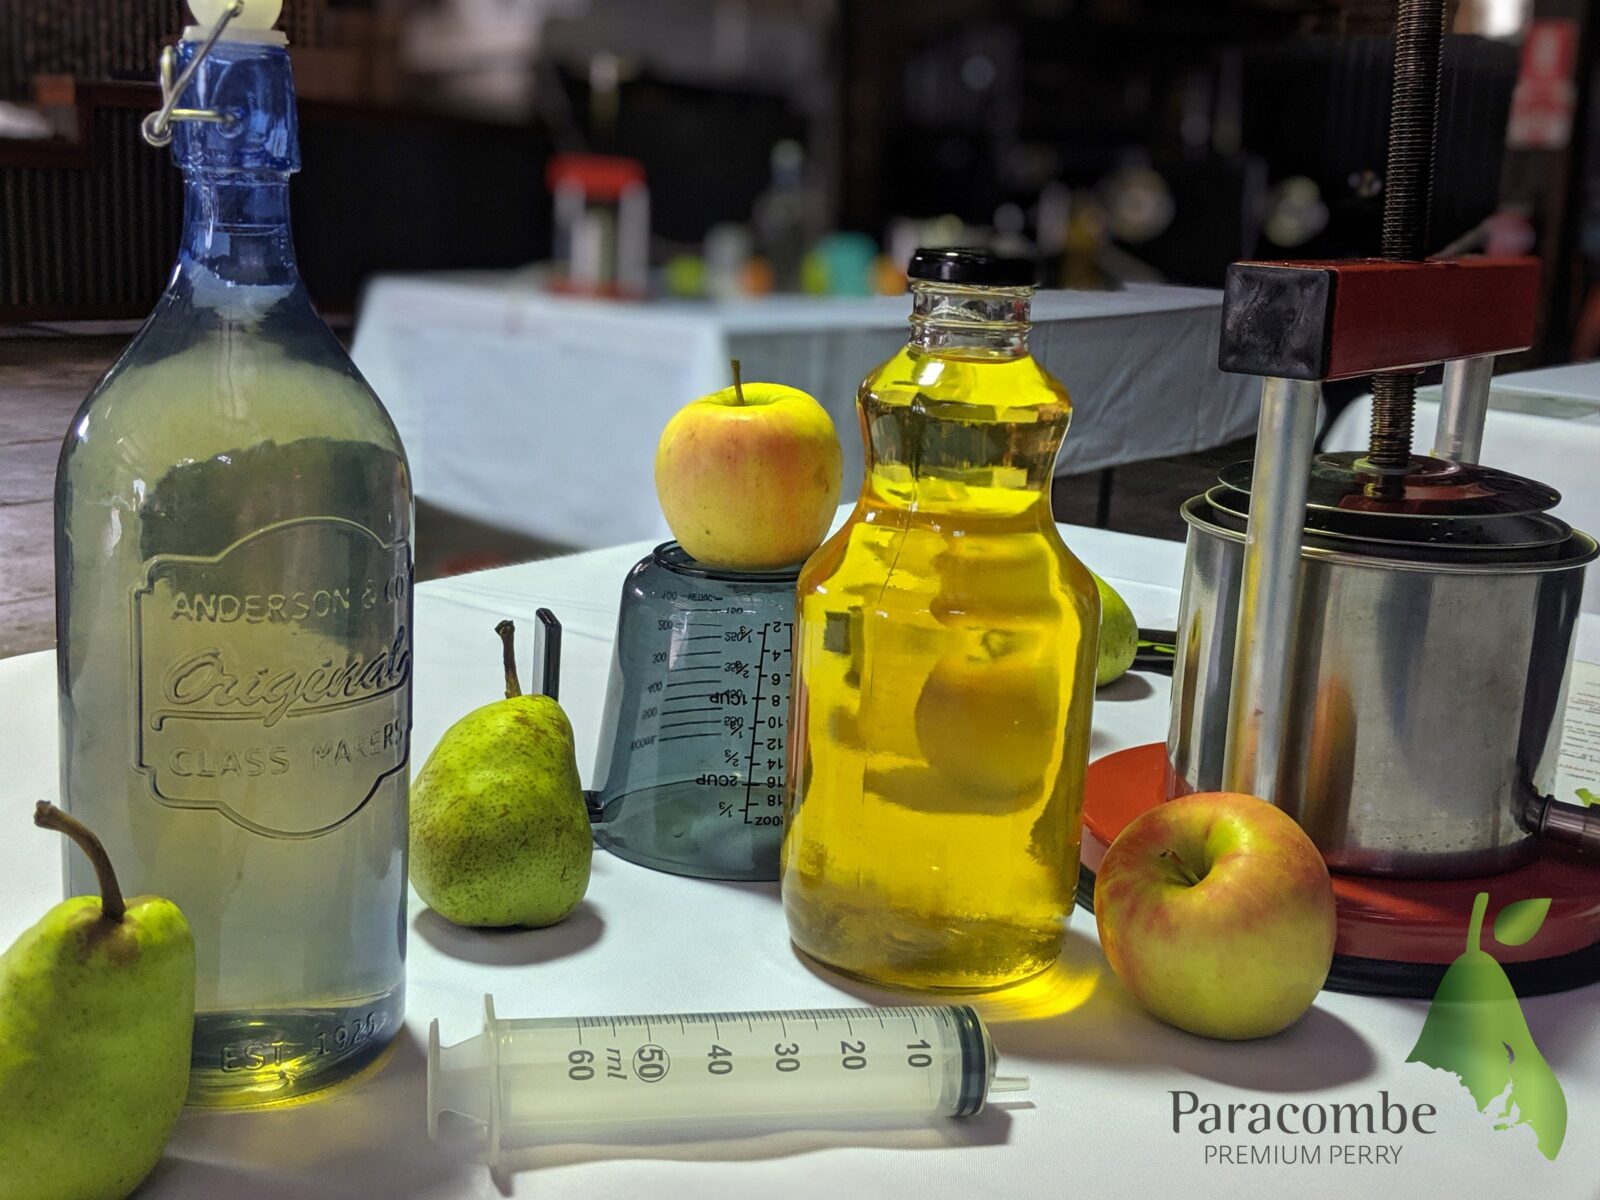 Paracombe Premium Perry blending experience